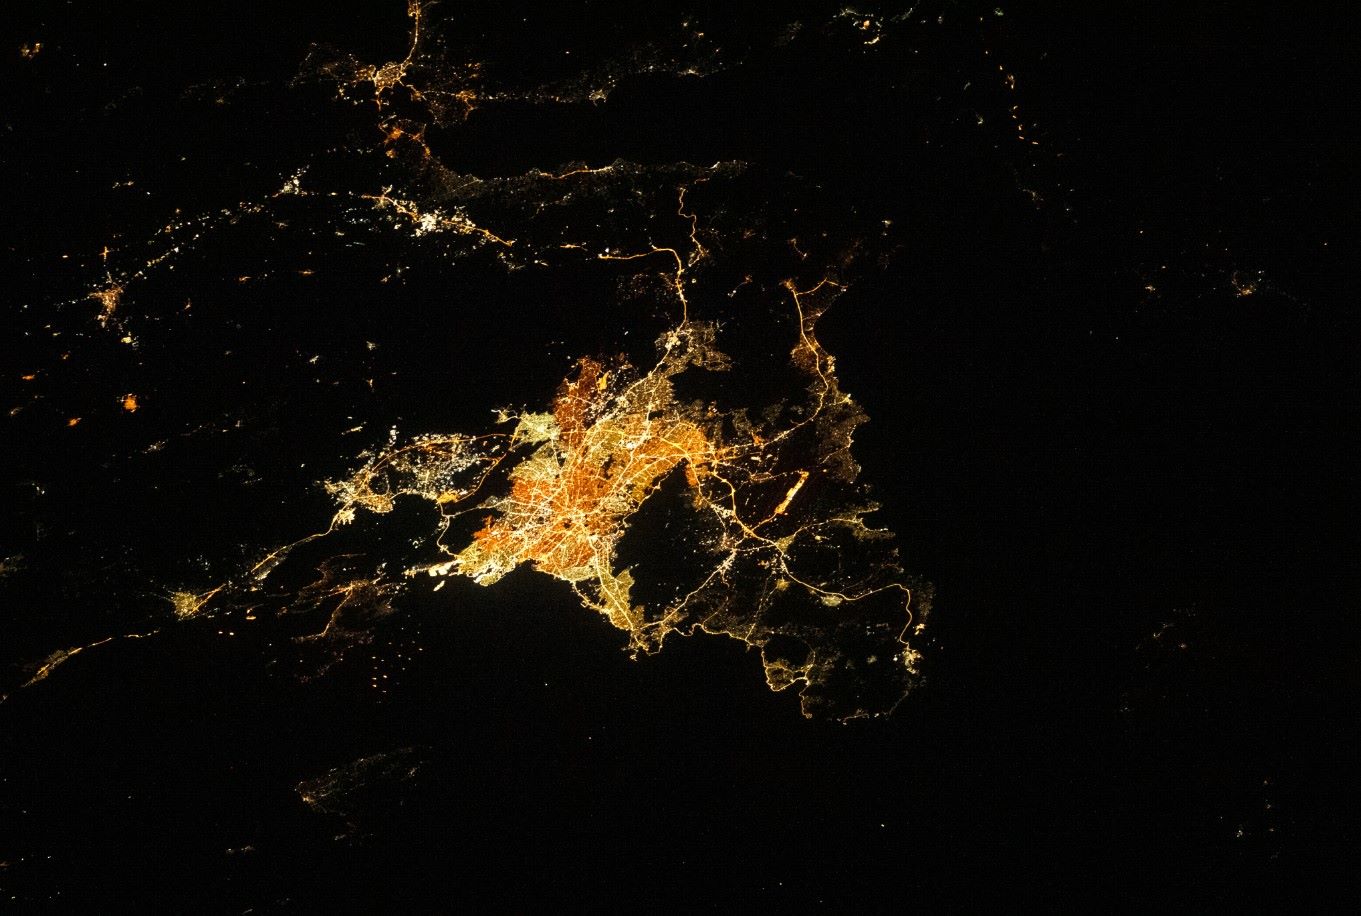 “Athens at Night” Snapped at Intl. Space Station